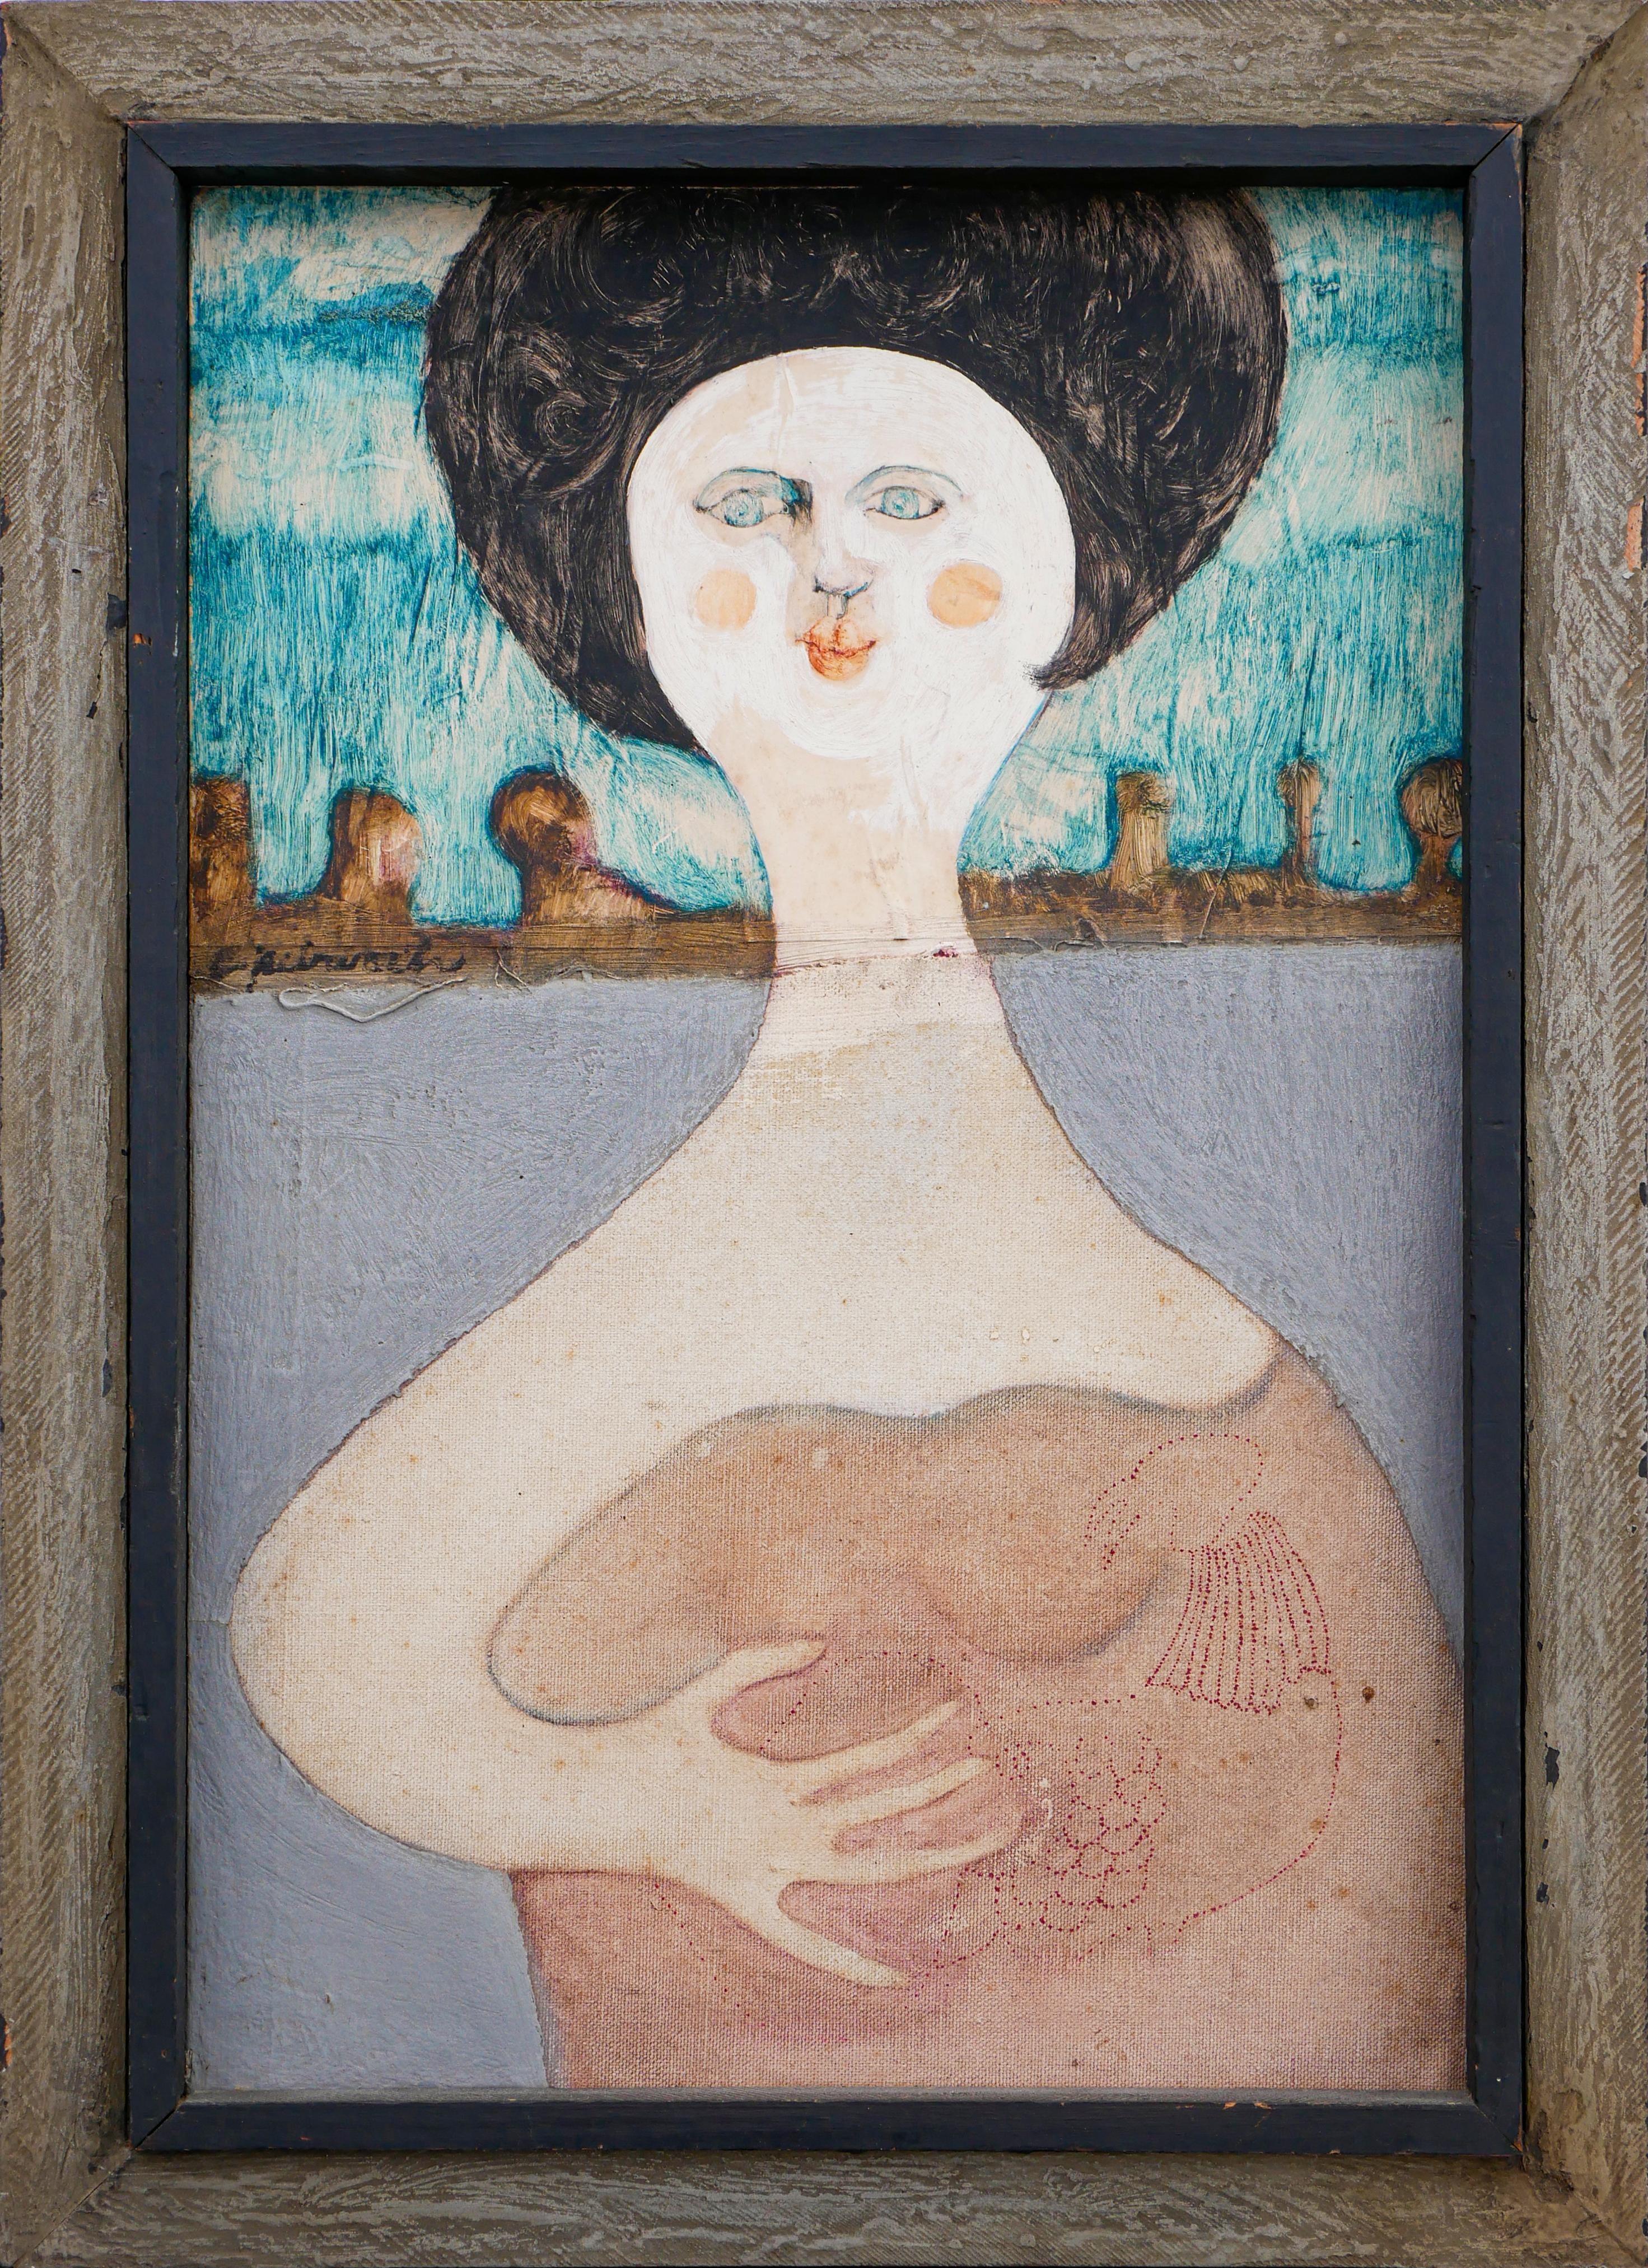 Blue, peach, and gray abstract figurative mixed media painting by Houston, TX artist Charles Pebworth. The piece depicts a woman with a big hairdo against a landscape scene. Signed and titled by the artist at the back. Framed in a gray-toned wooden